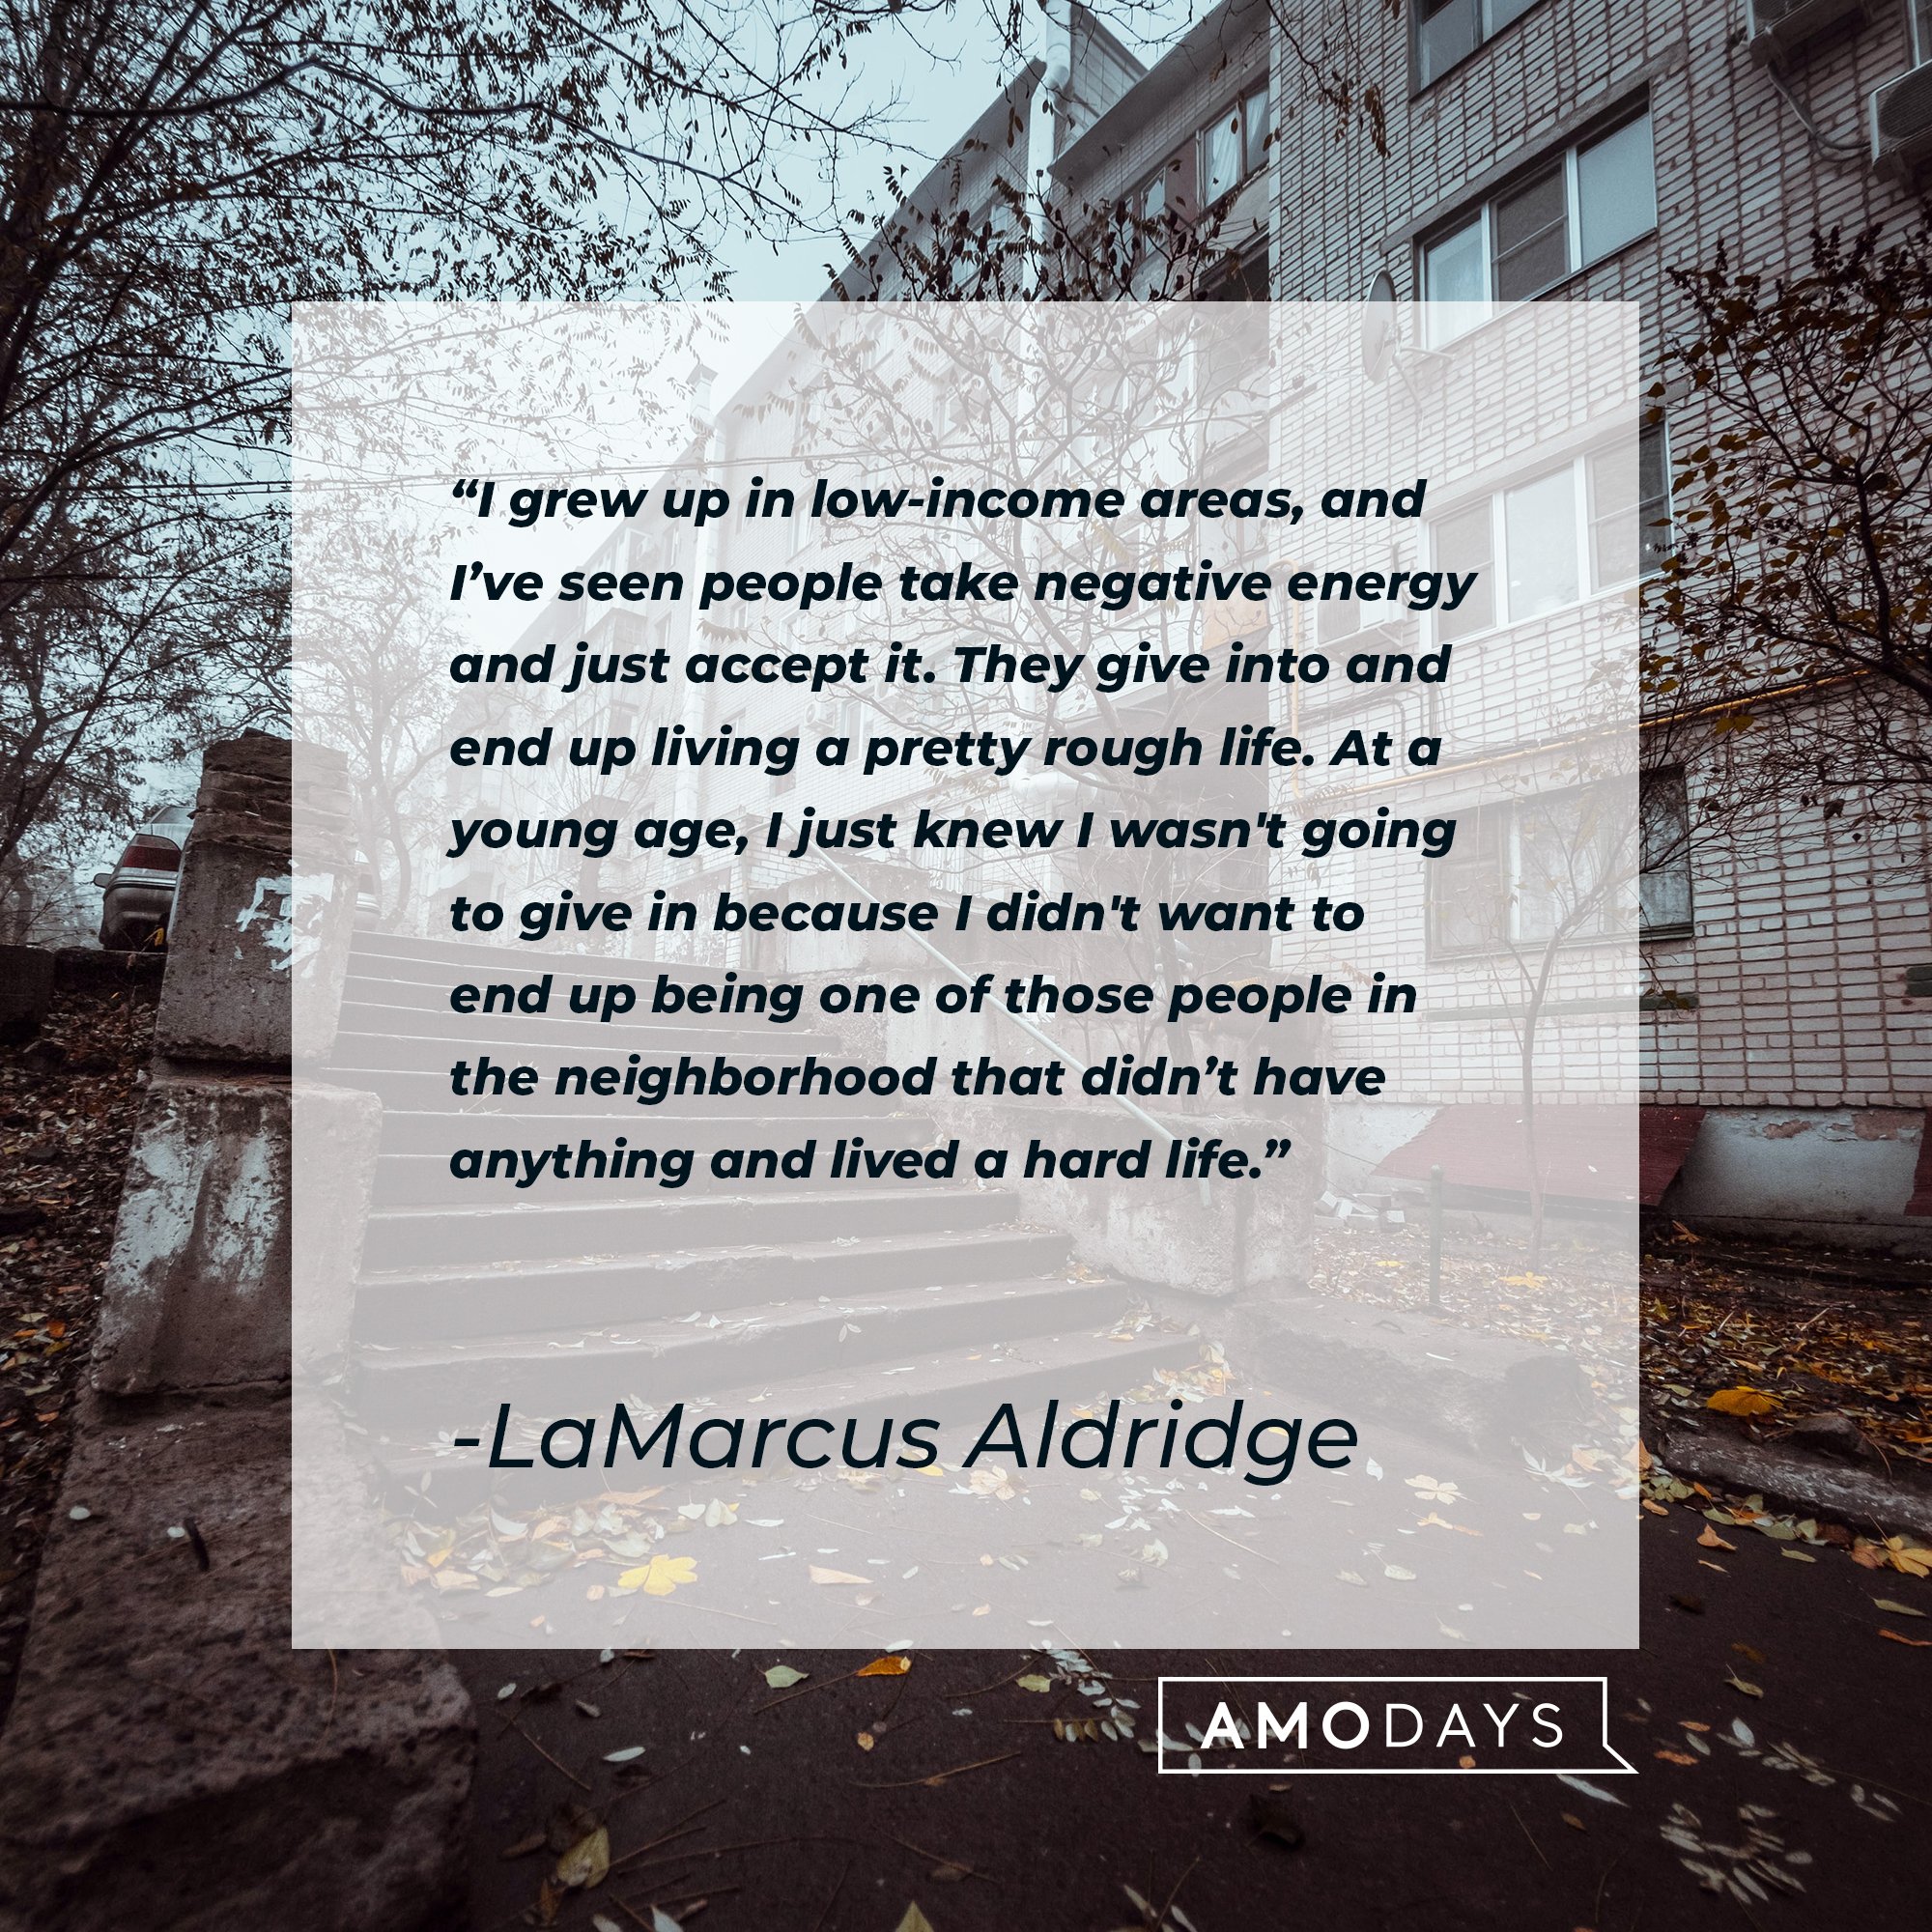 LaMarcus Aldridge’s quote: "I grew up in low-income areas, and I’ve seen people take negative energy and just accept it. They give into and end up living a pretty rough life. At a young age, I just knew I wasn't going to give in because I didn't want to end up being one of those people in the neighborhood that didn’t have anything and lived a hard life.” | Image: AmoDays 